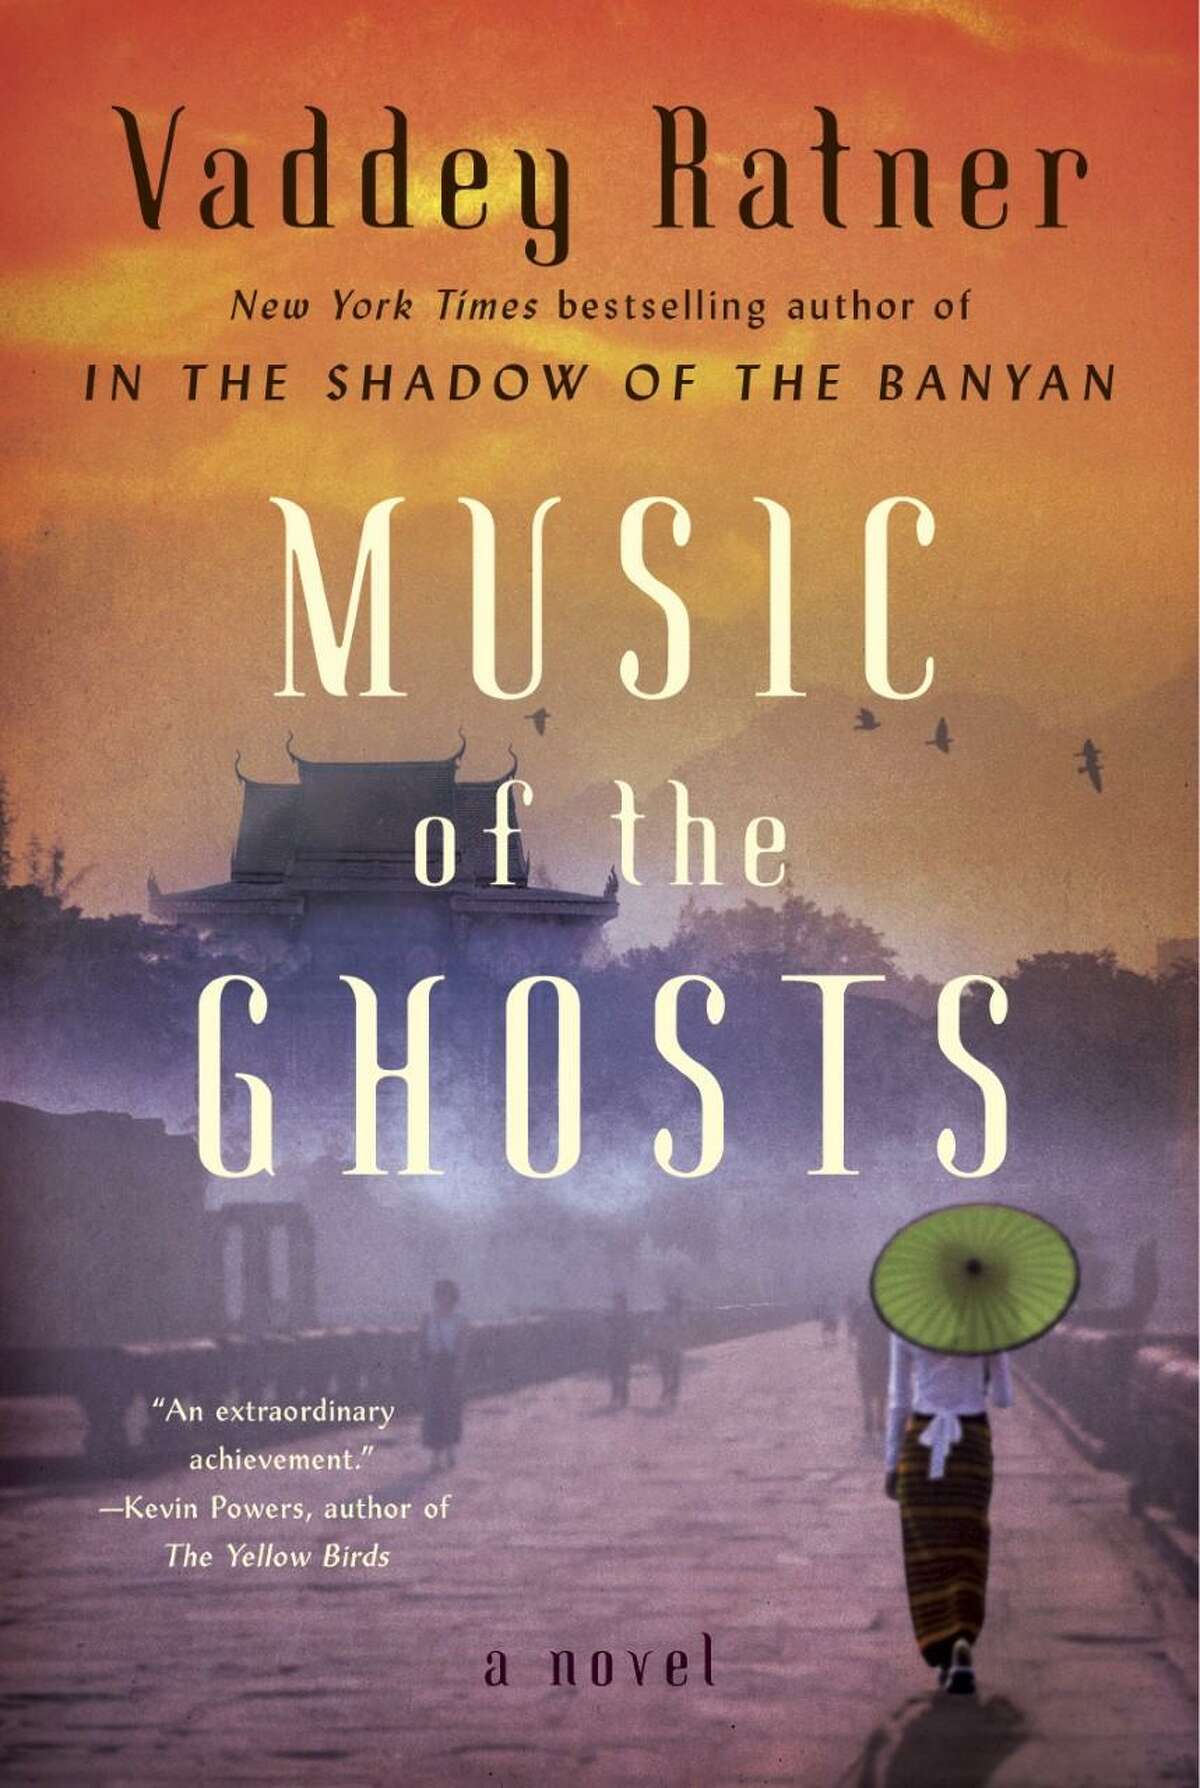 Vaddey Ratner's new book, "Music of the Ghosts" comes out April 11. Ratner will be in Darien April 17 to discuss the novel.